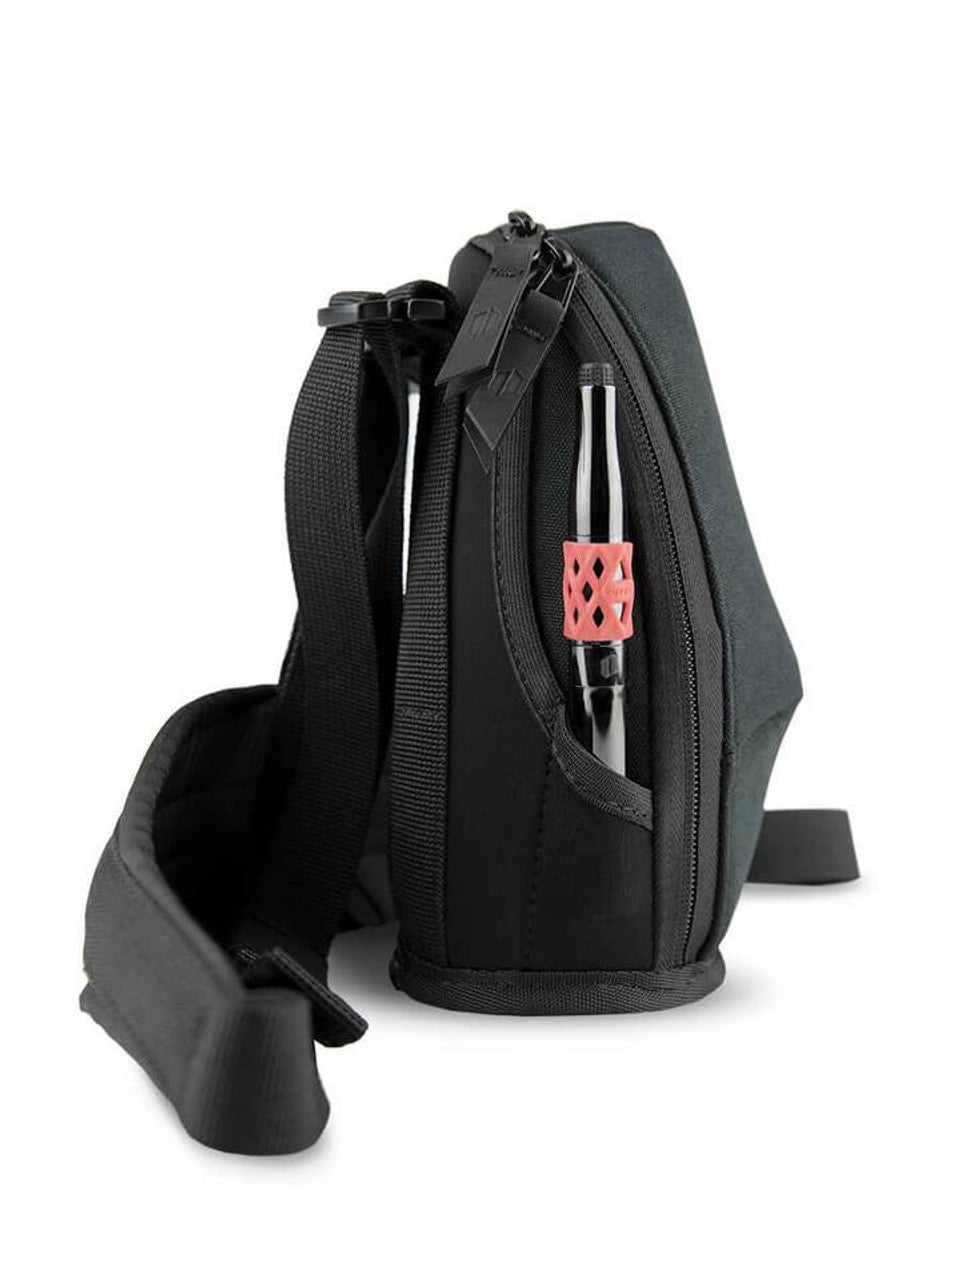 Puffco Peak Bag side view showcasing the durable fabric and secure zipper closure for travel